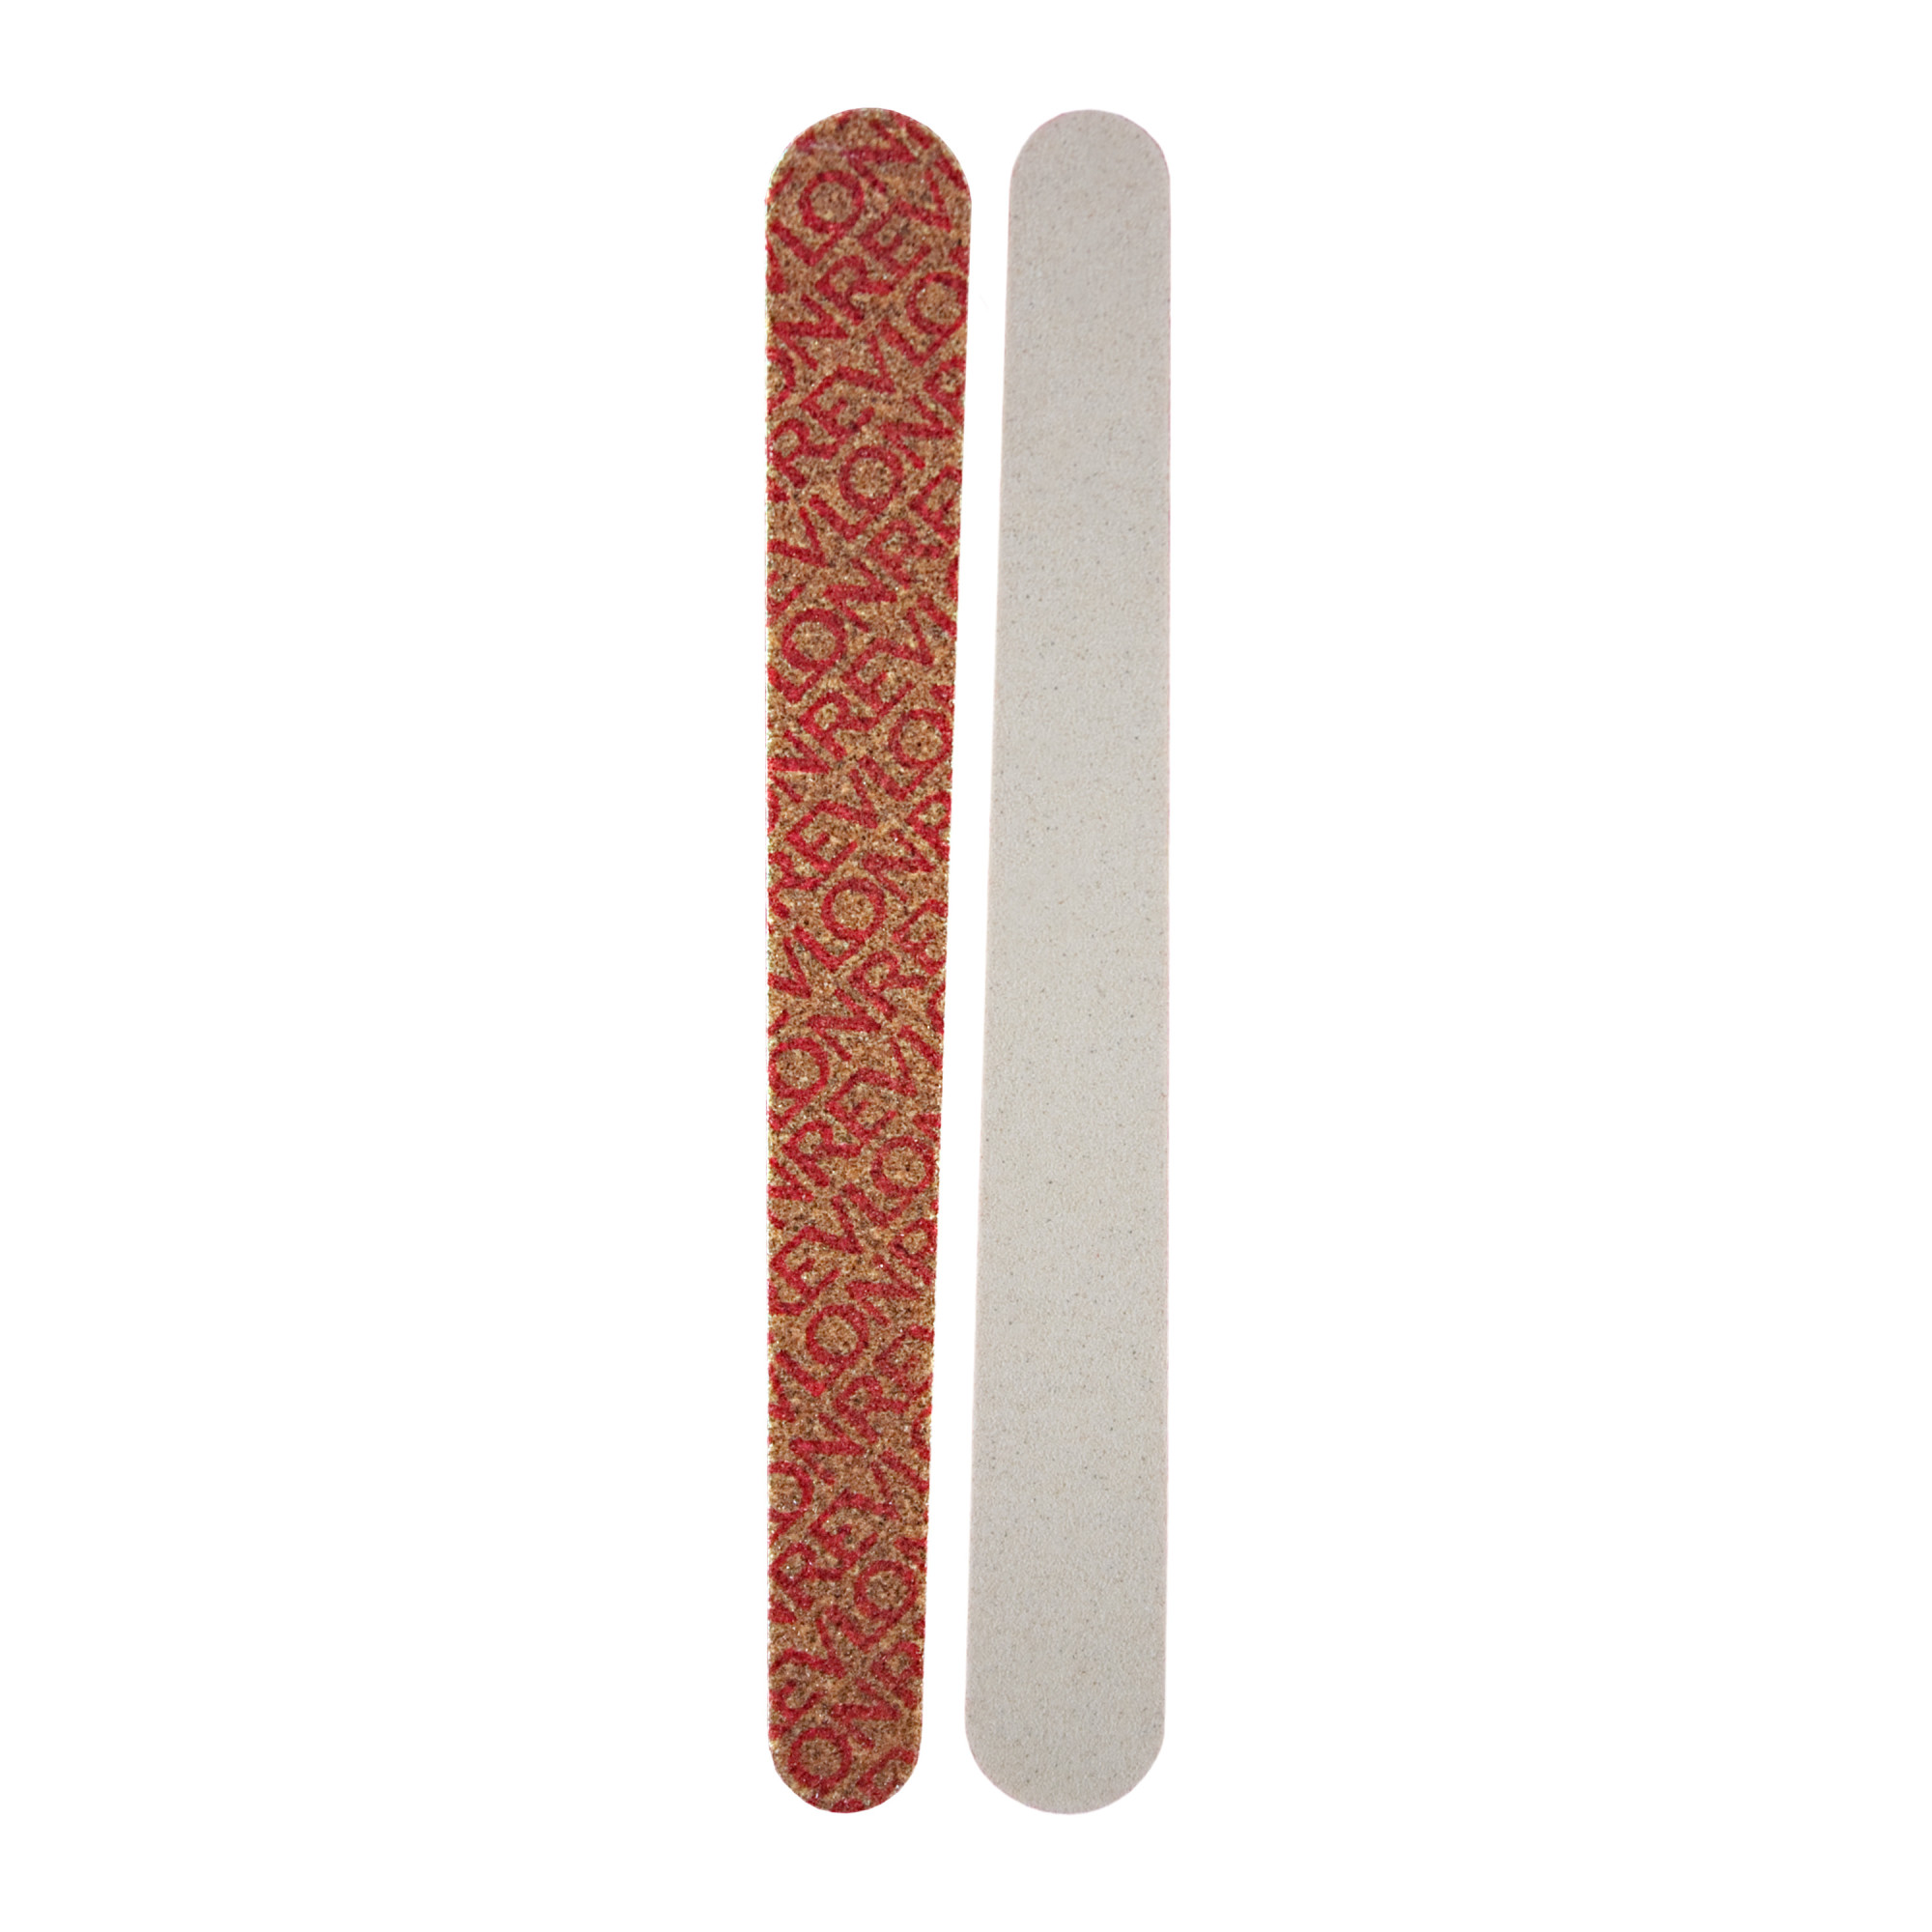 Revlon Compact Emery Boards, Dual Sided Nail File For Precise Nail Shaping And Smoothing, 24 count - image 3 of 5